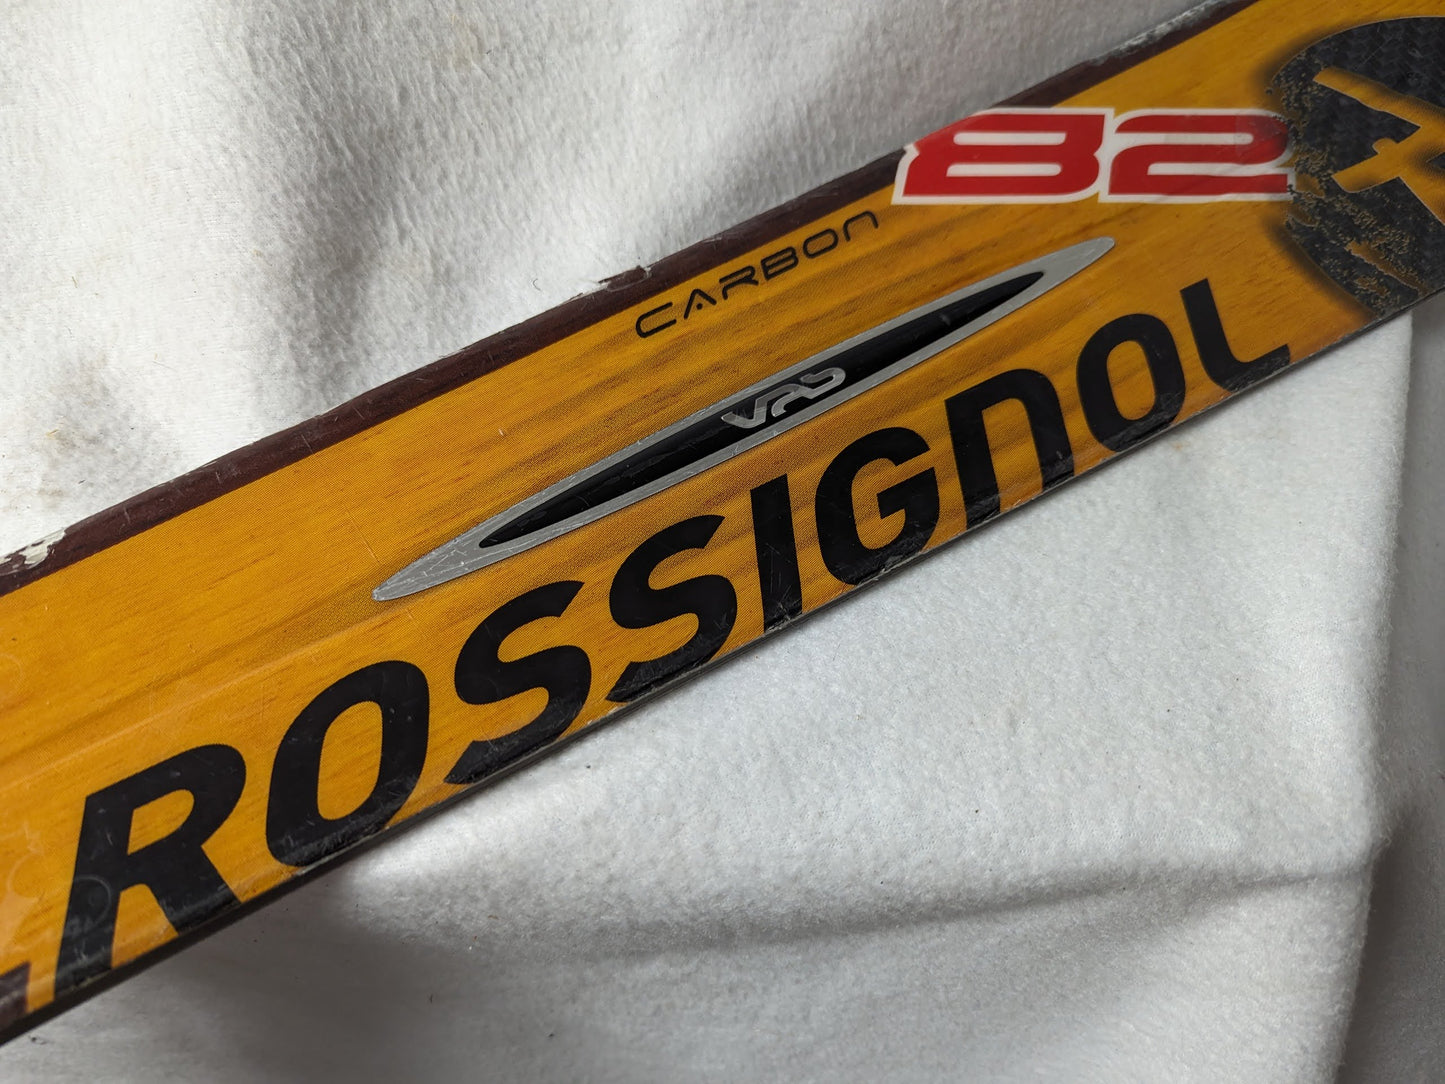 Rossignol Skis w/Rossignol Bindings Size 170 cm Color Yellow and Red Condition Used